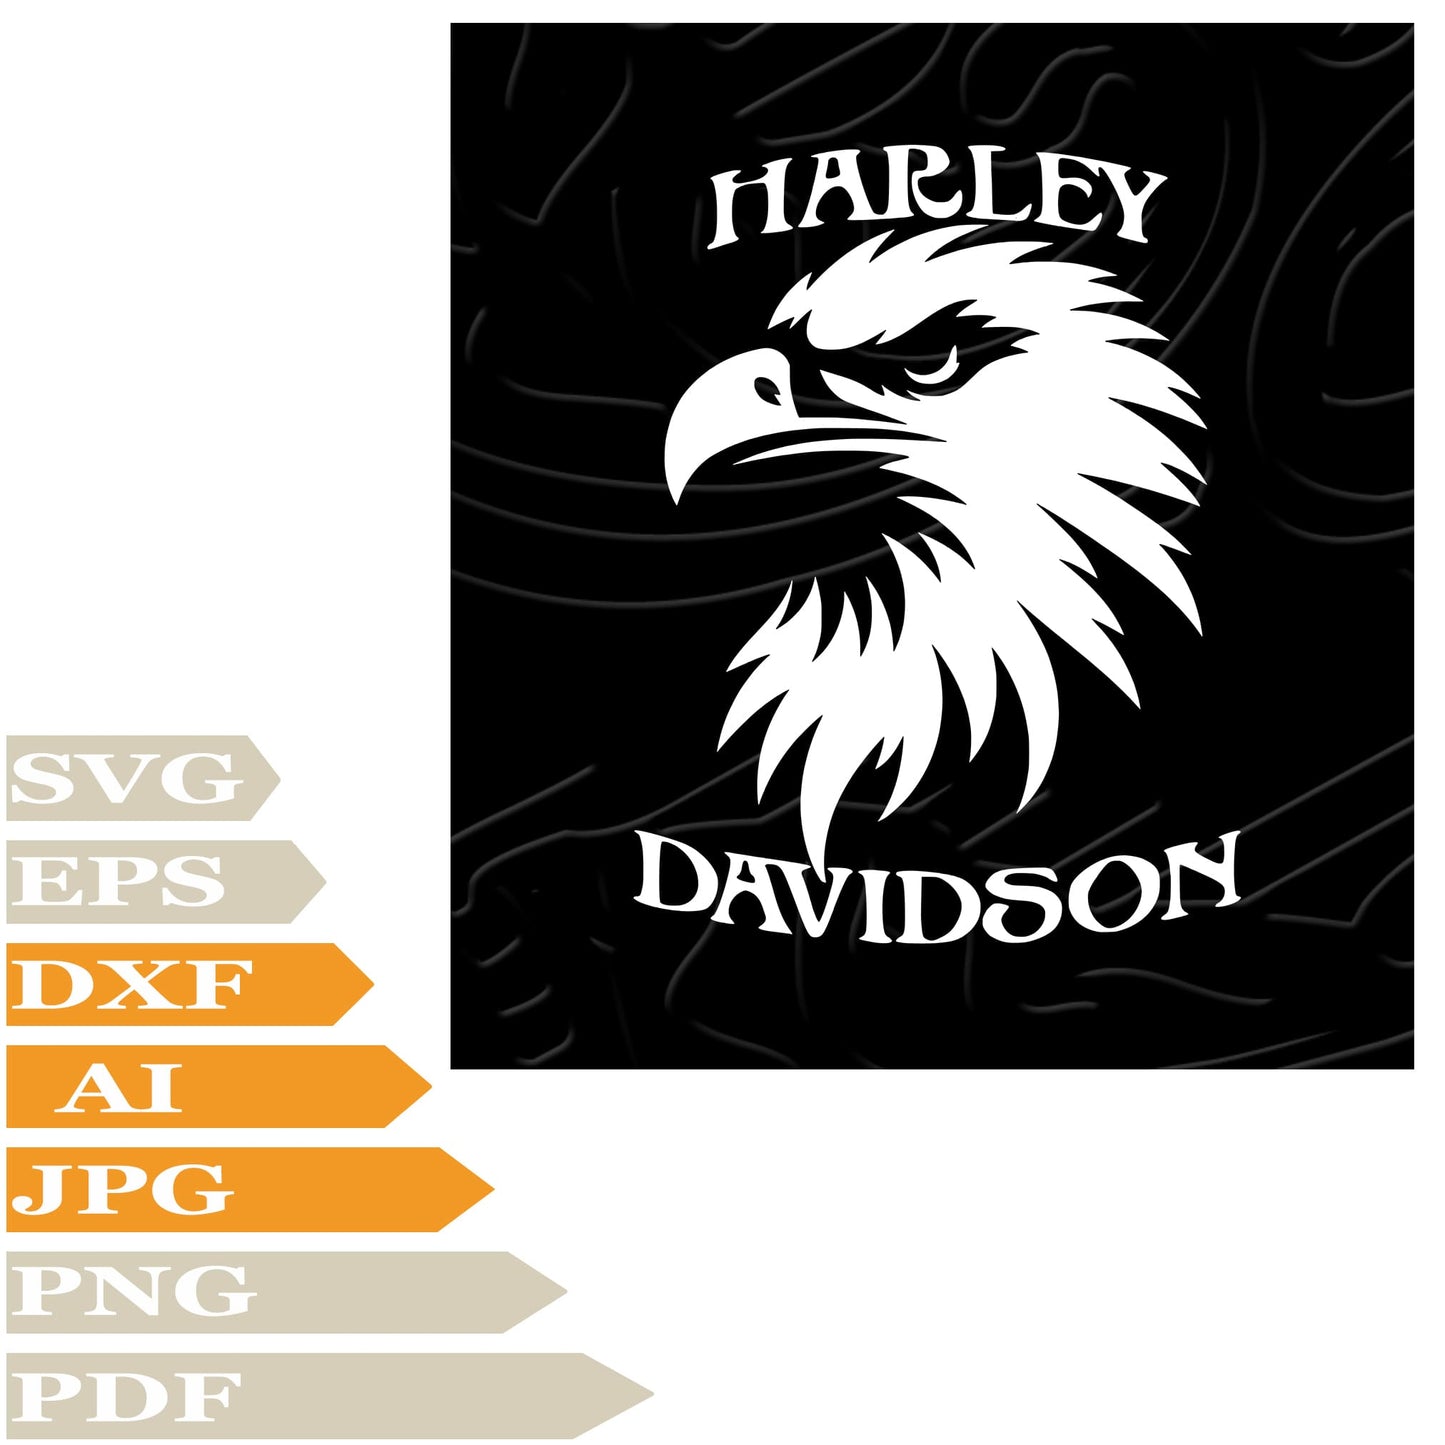 Eagle SVG, Eagle Harley Davidson Logo SVG Design, Harley Davidson Vector Graphics, Eagle Harley Davidson Logo For Cricut, For Tattoo, Clip Art, Cut File, T-Shirts, Silhouette, All Available